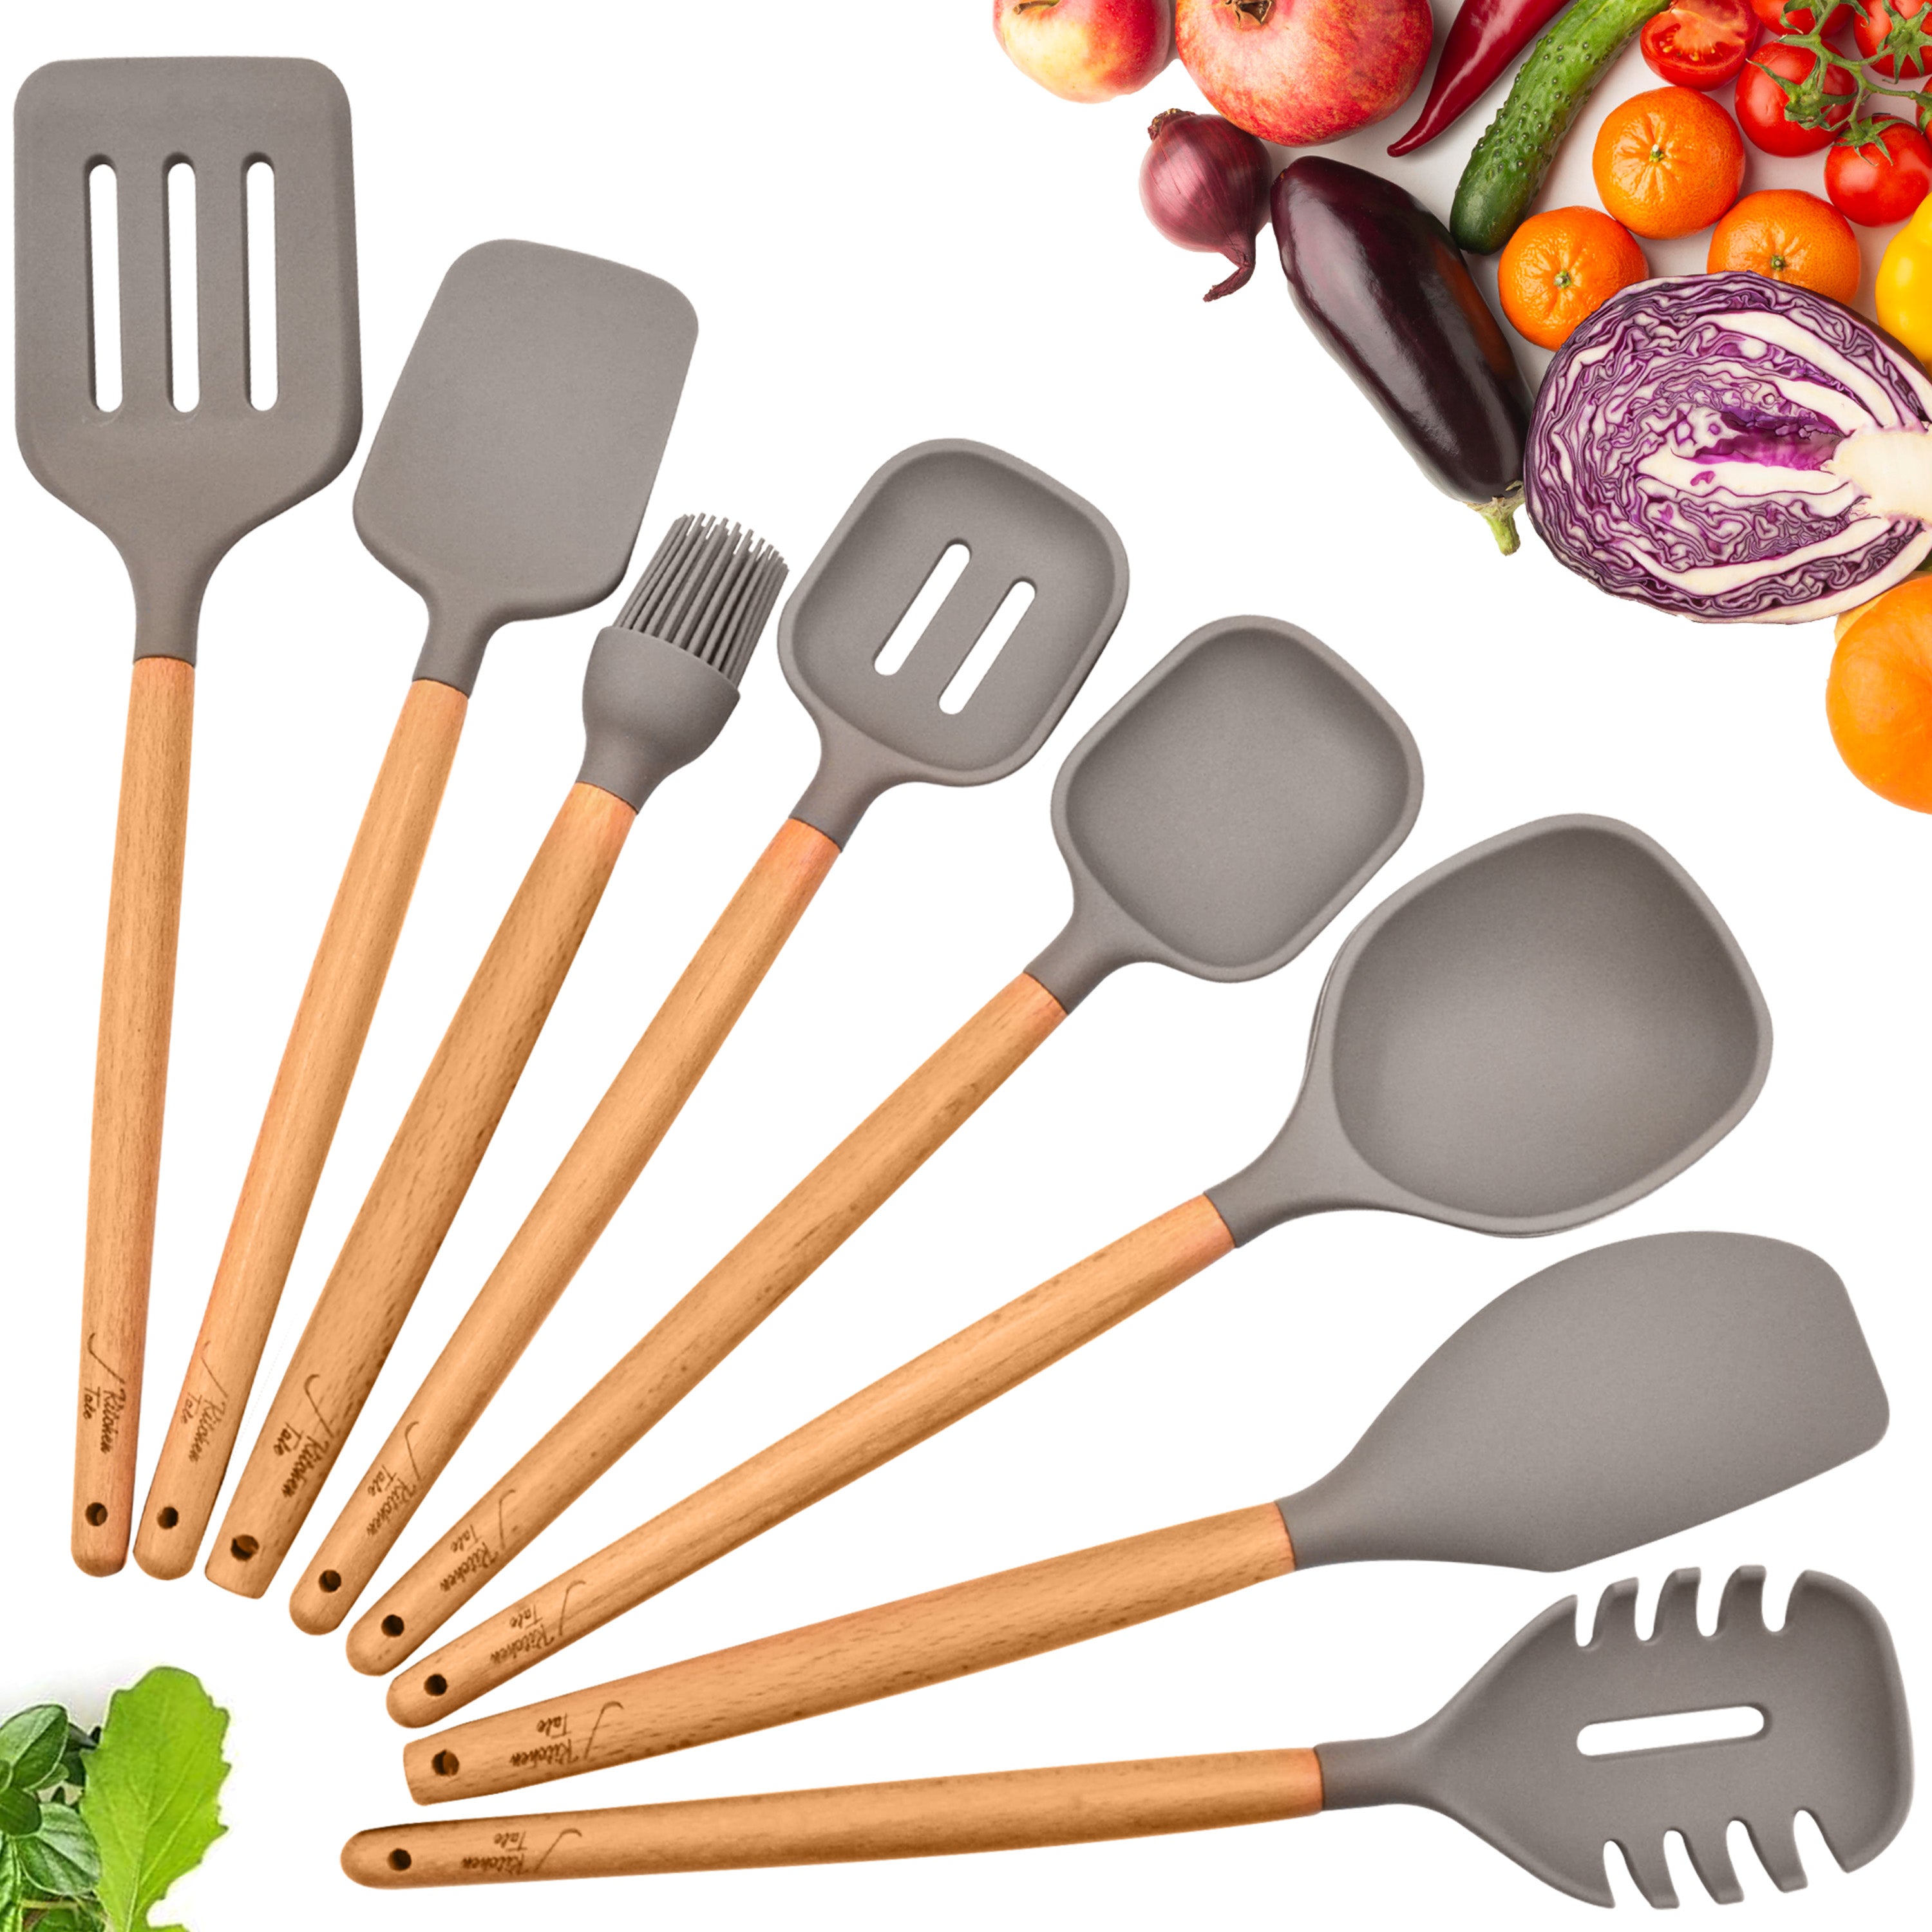 White Nonstick Silicone Induction Utensils Set With Wooden Handle, Anti  Slip Shovel, Spoon, Oil Brush 230809 From Lu008, $7.83